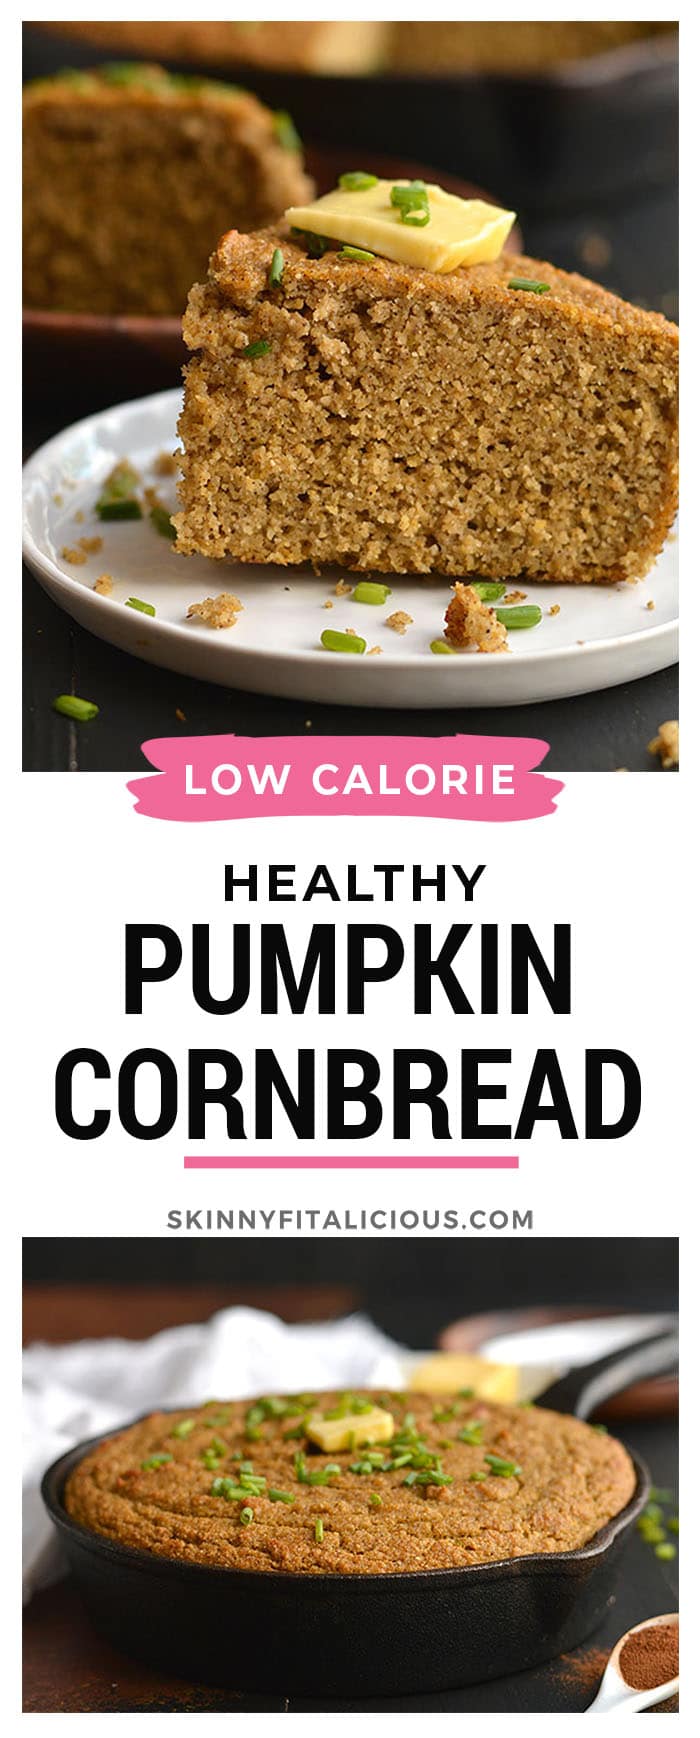 Almond Flour Pumpkin Cornbread! Almond Flour Pumpkin Cornbread! Gluten free and dairy free cornbread made refined sugar free and lower in calories. The perfect cornbread for the holidays! Gluten Free + Low Calorie